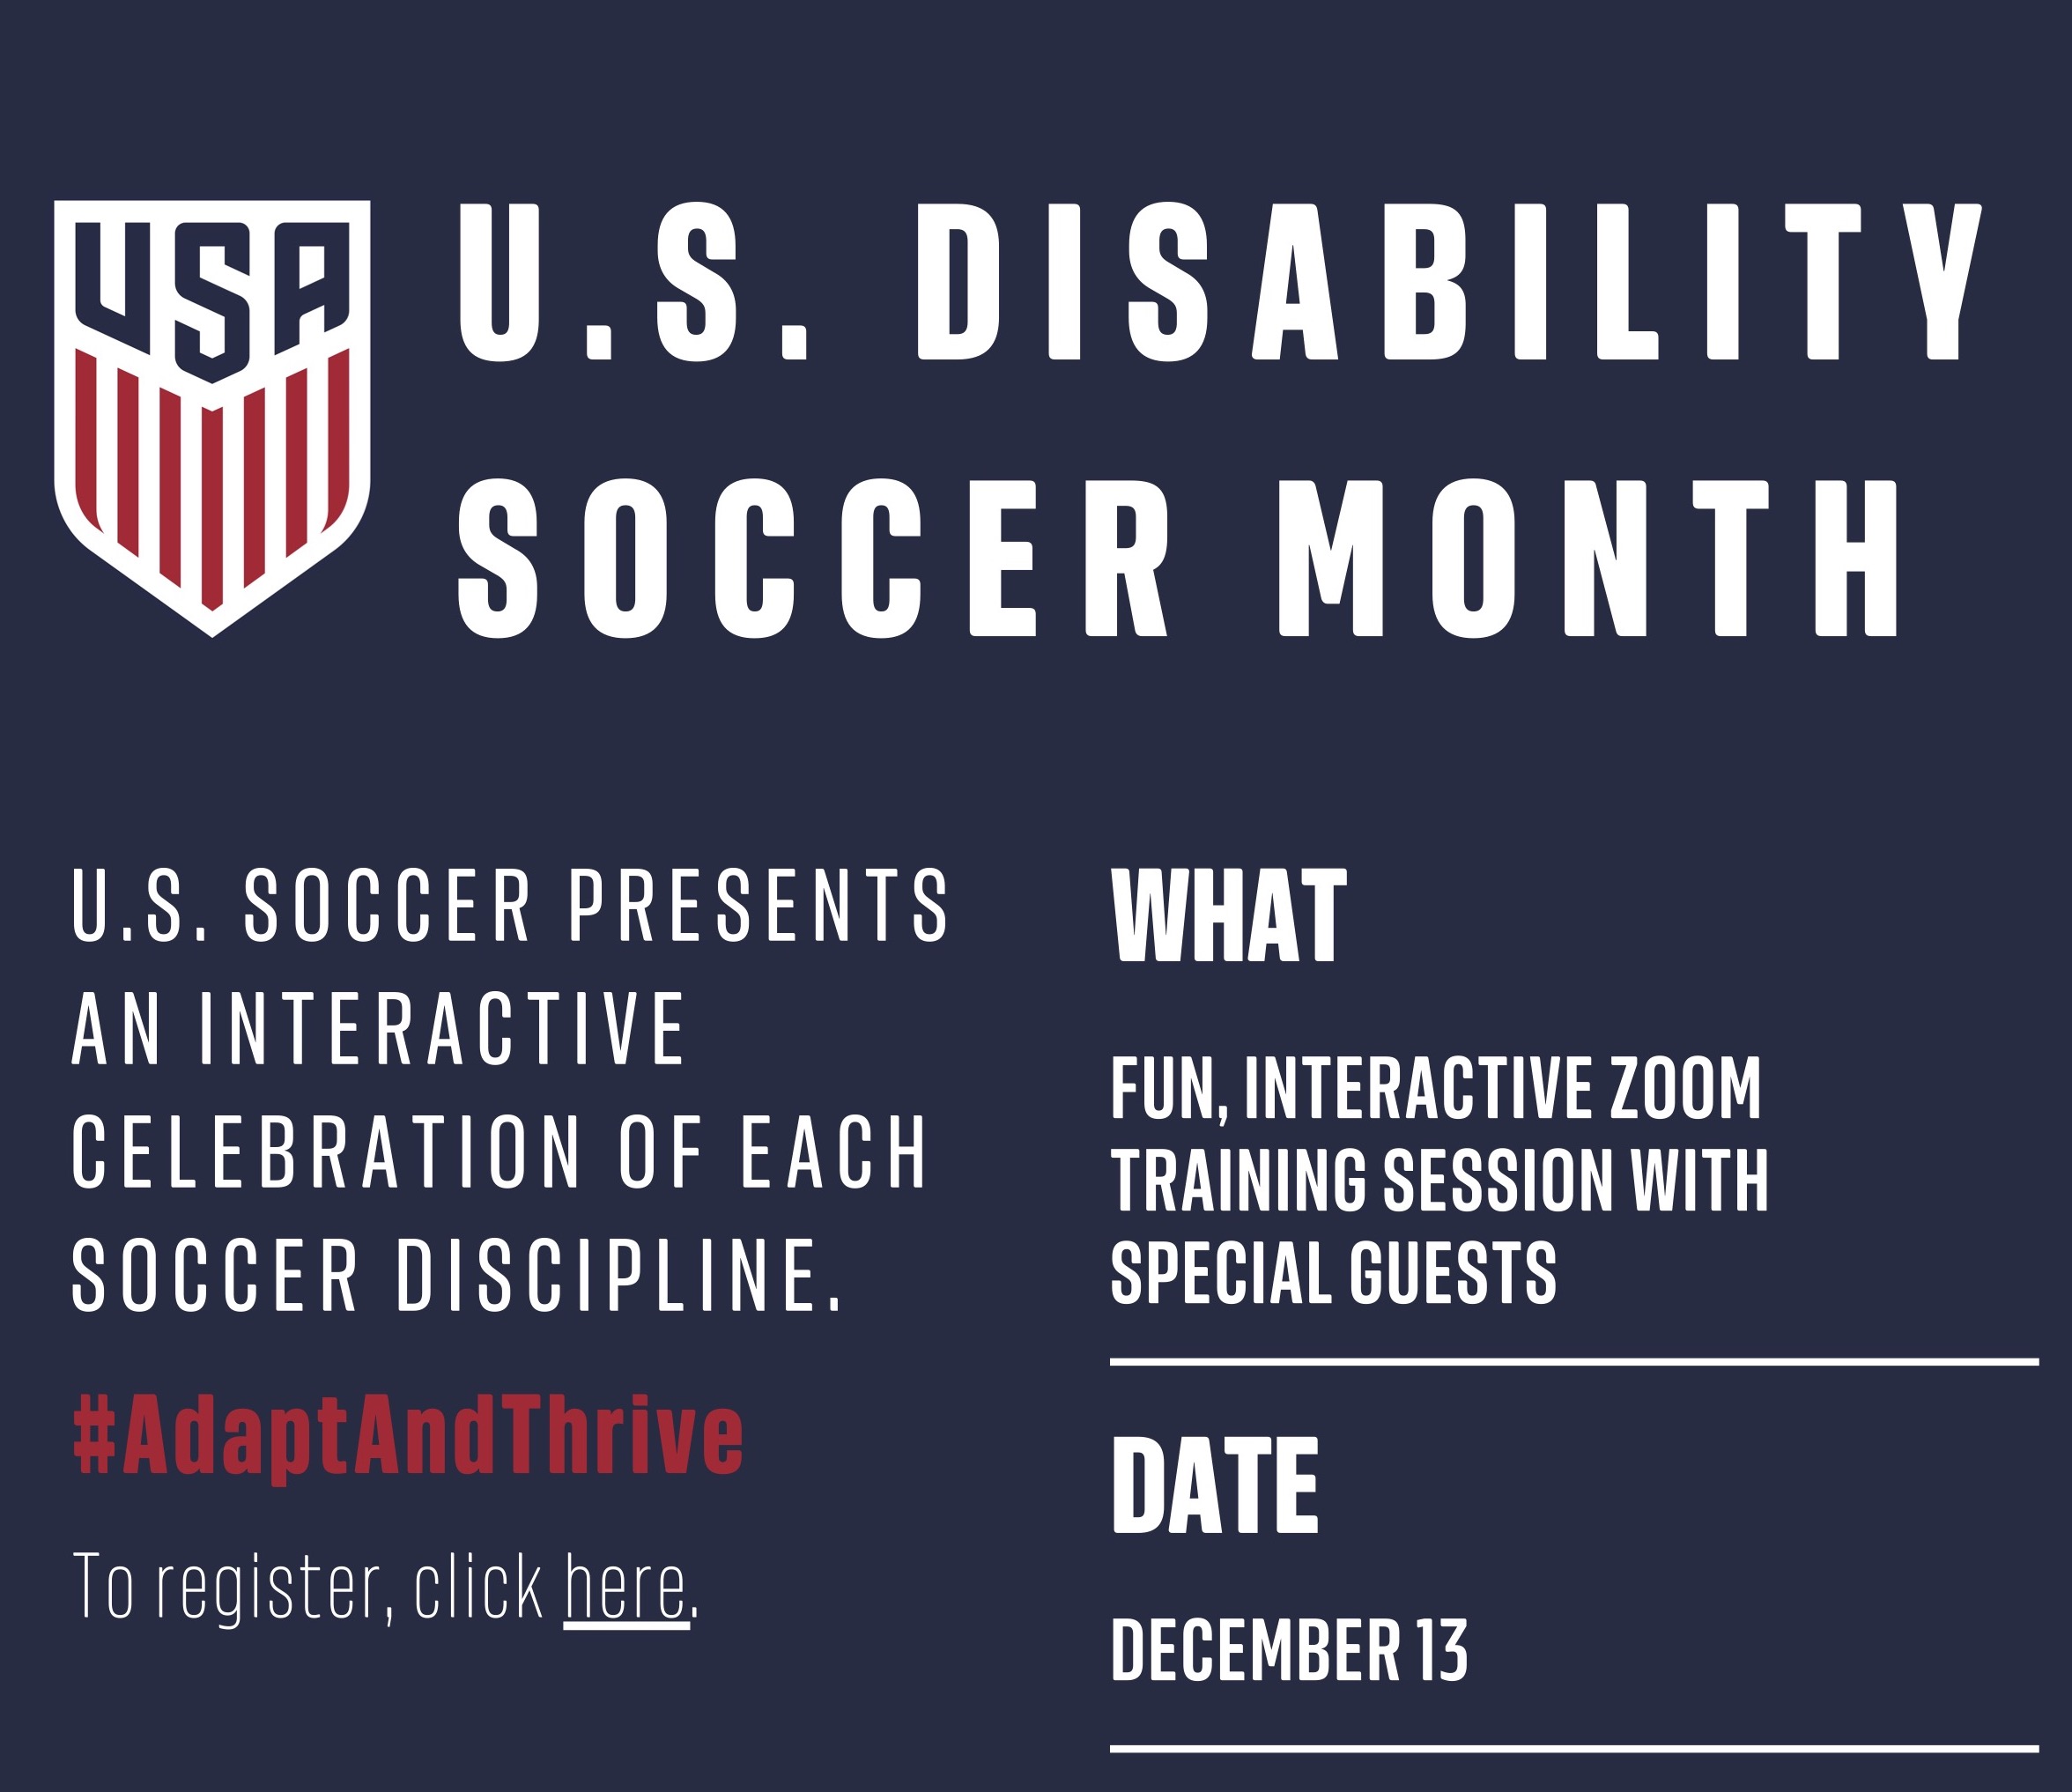 Introducing The Women In Soccer Summit and US Disability Soccer Month